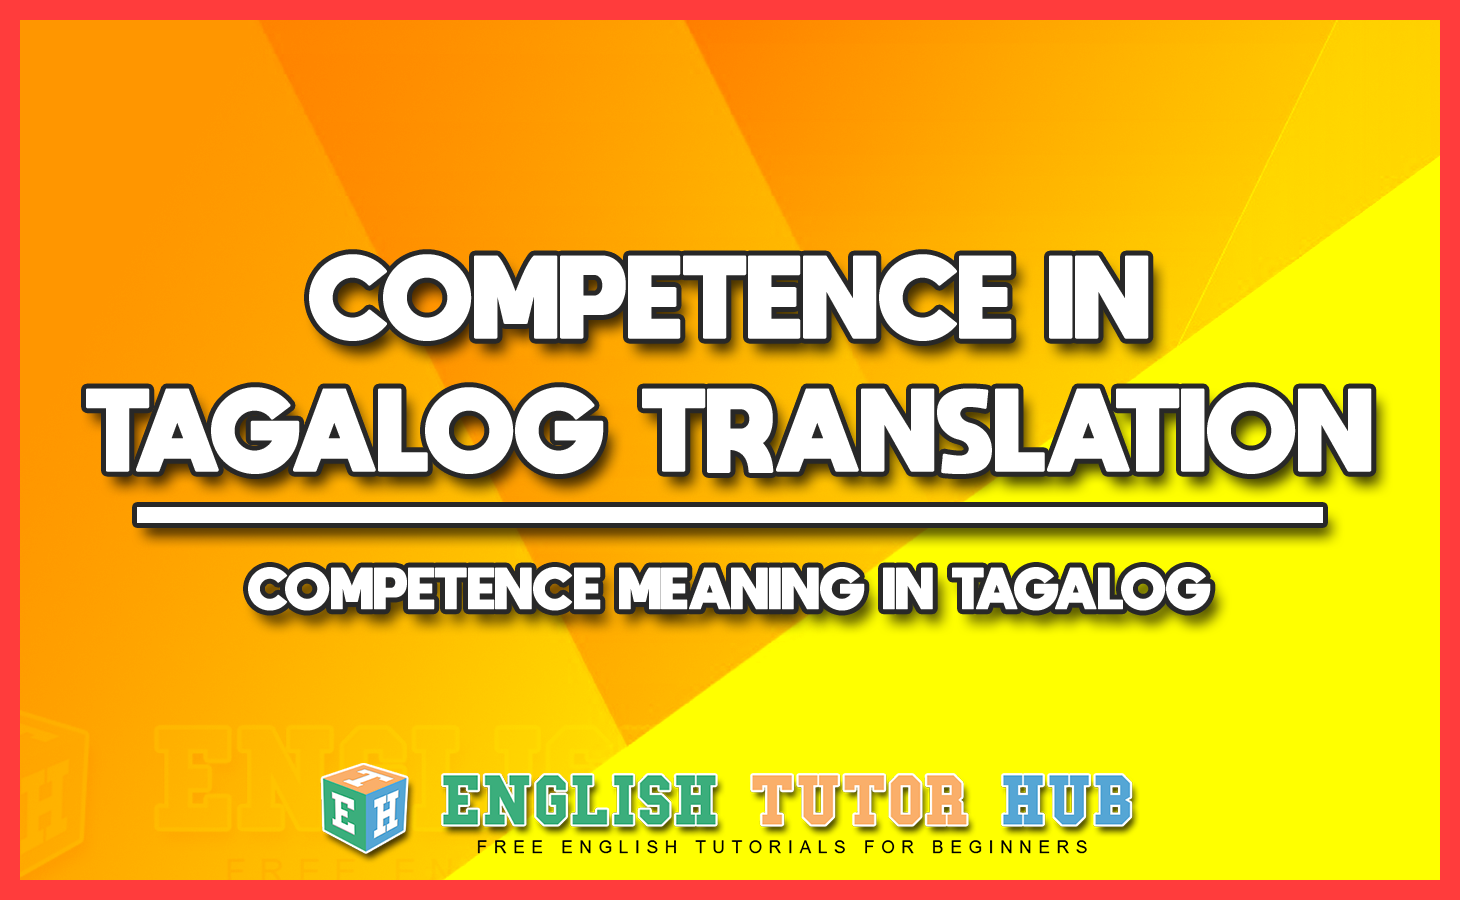 COMPETENCE IN TAGALOG TRANSLATION - COMPETENCE MEANING IN TAGALOG